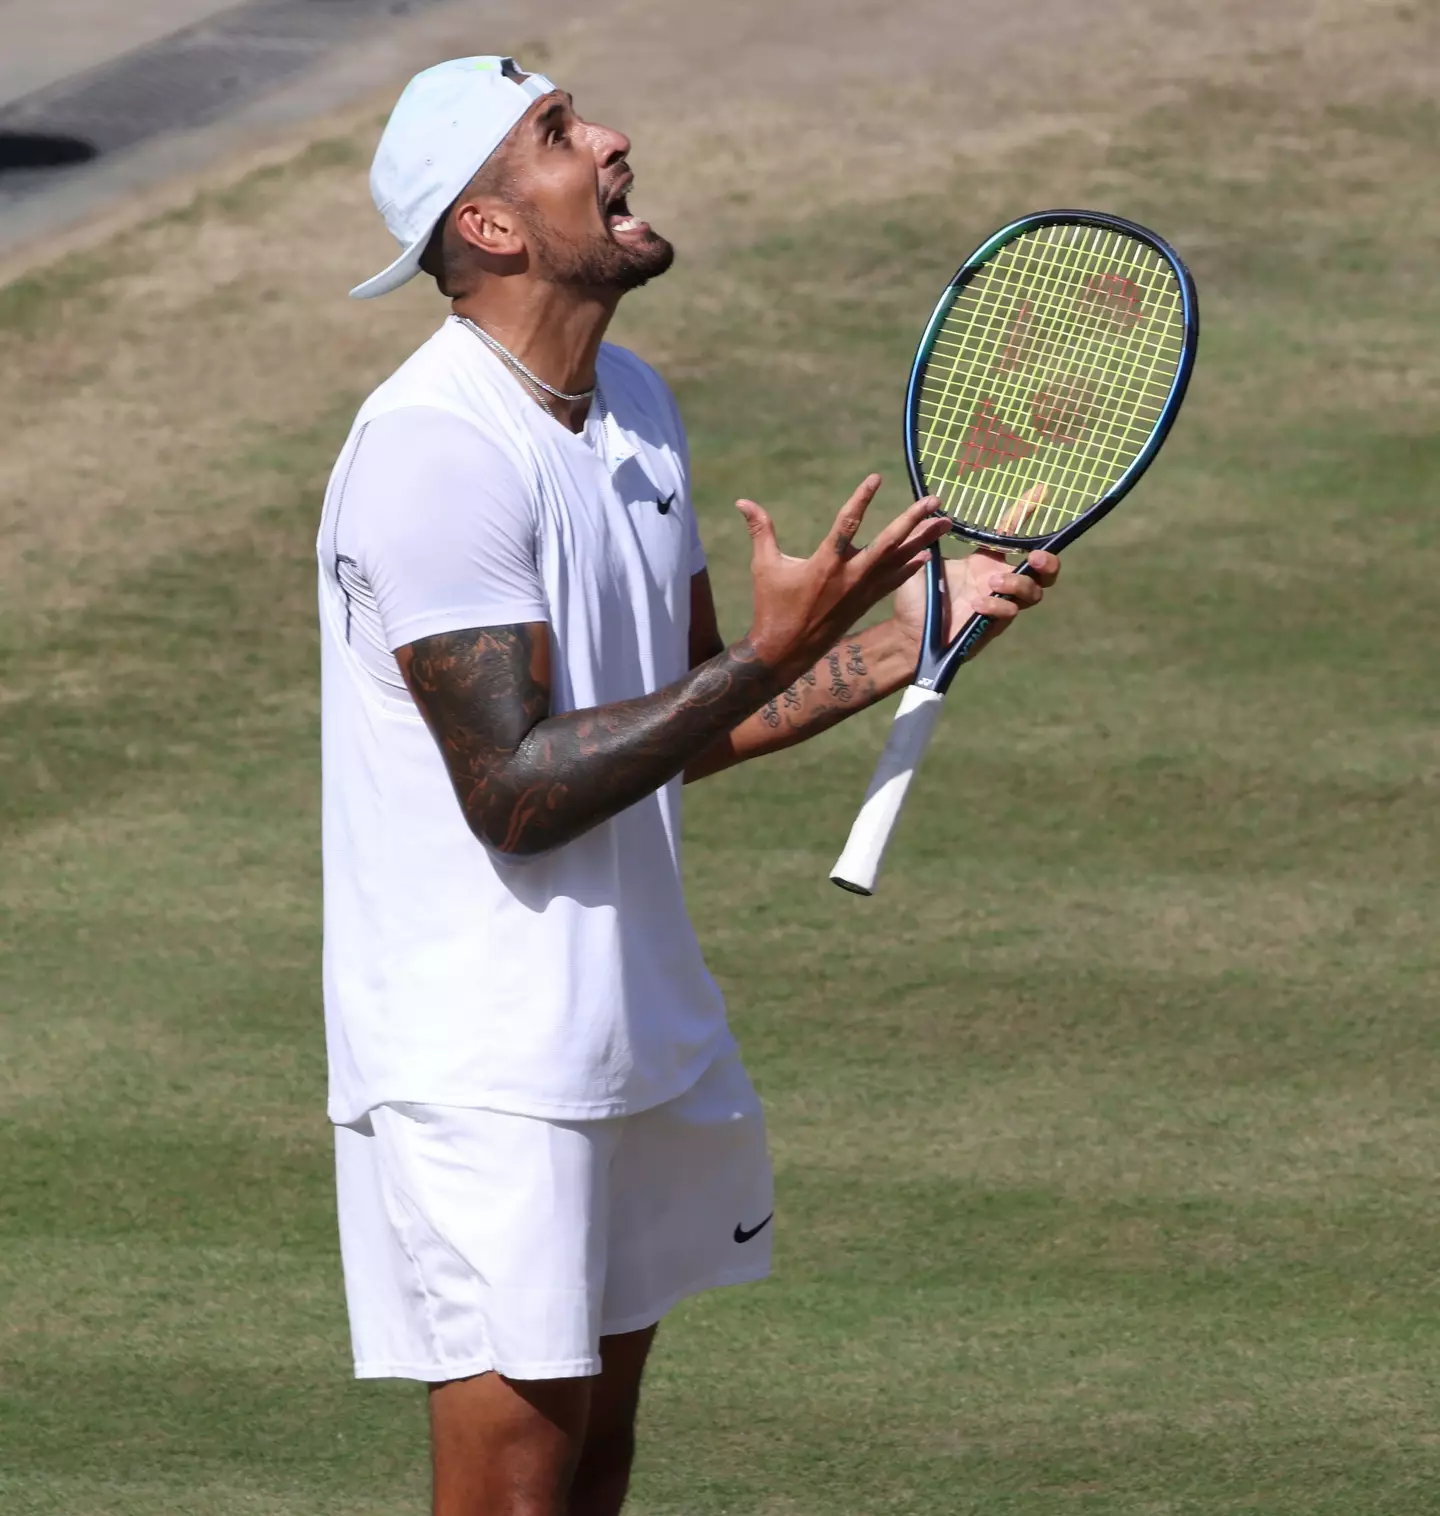 Nick Kyrgios lashed out at a woman in the crowd during the Wimbledon final.